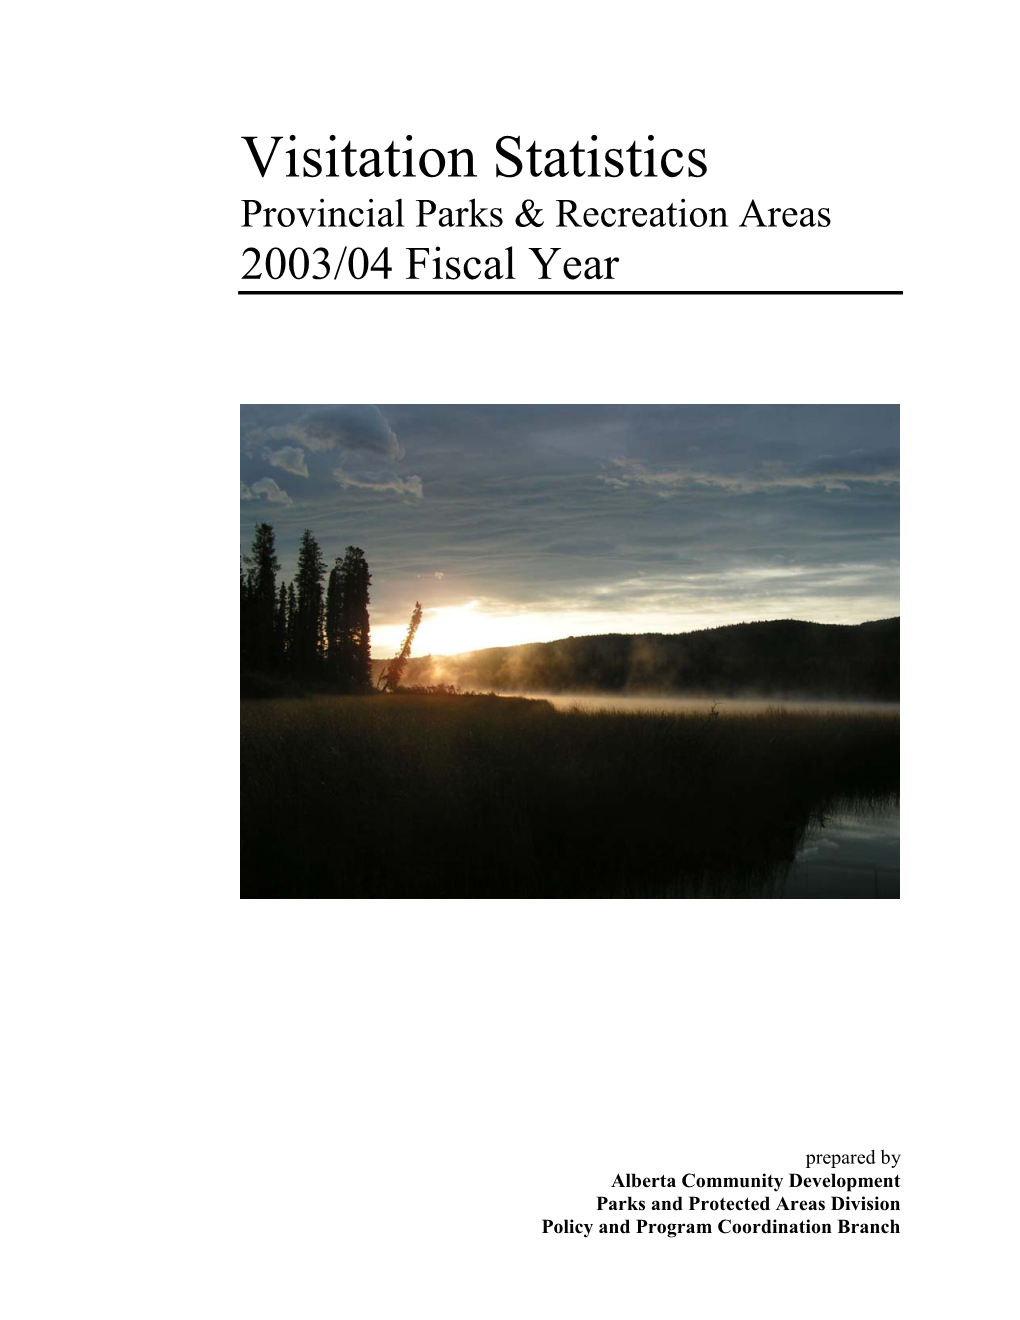 Visitation Statistics Provincial Parks & Recreation Areas 2003/04 Fiscal Year